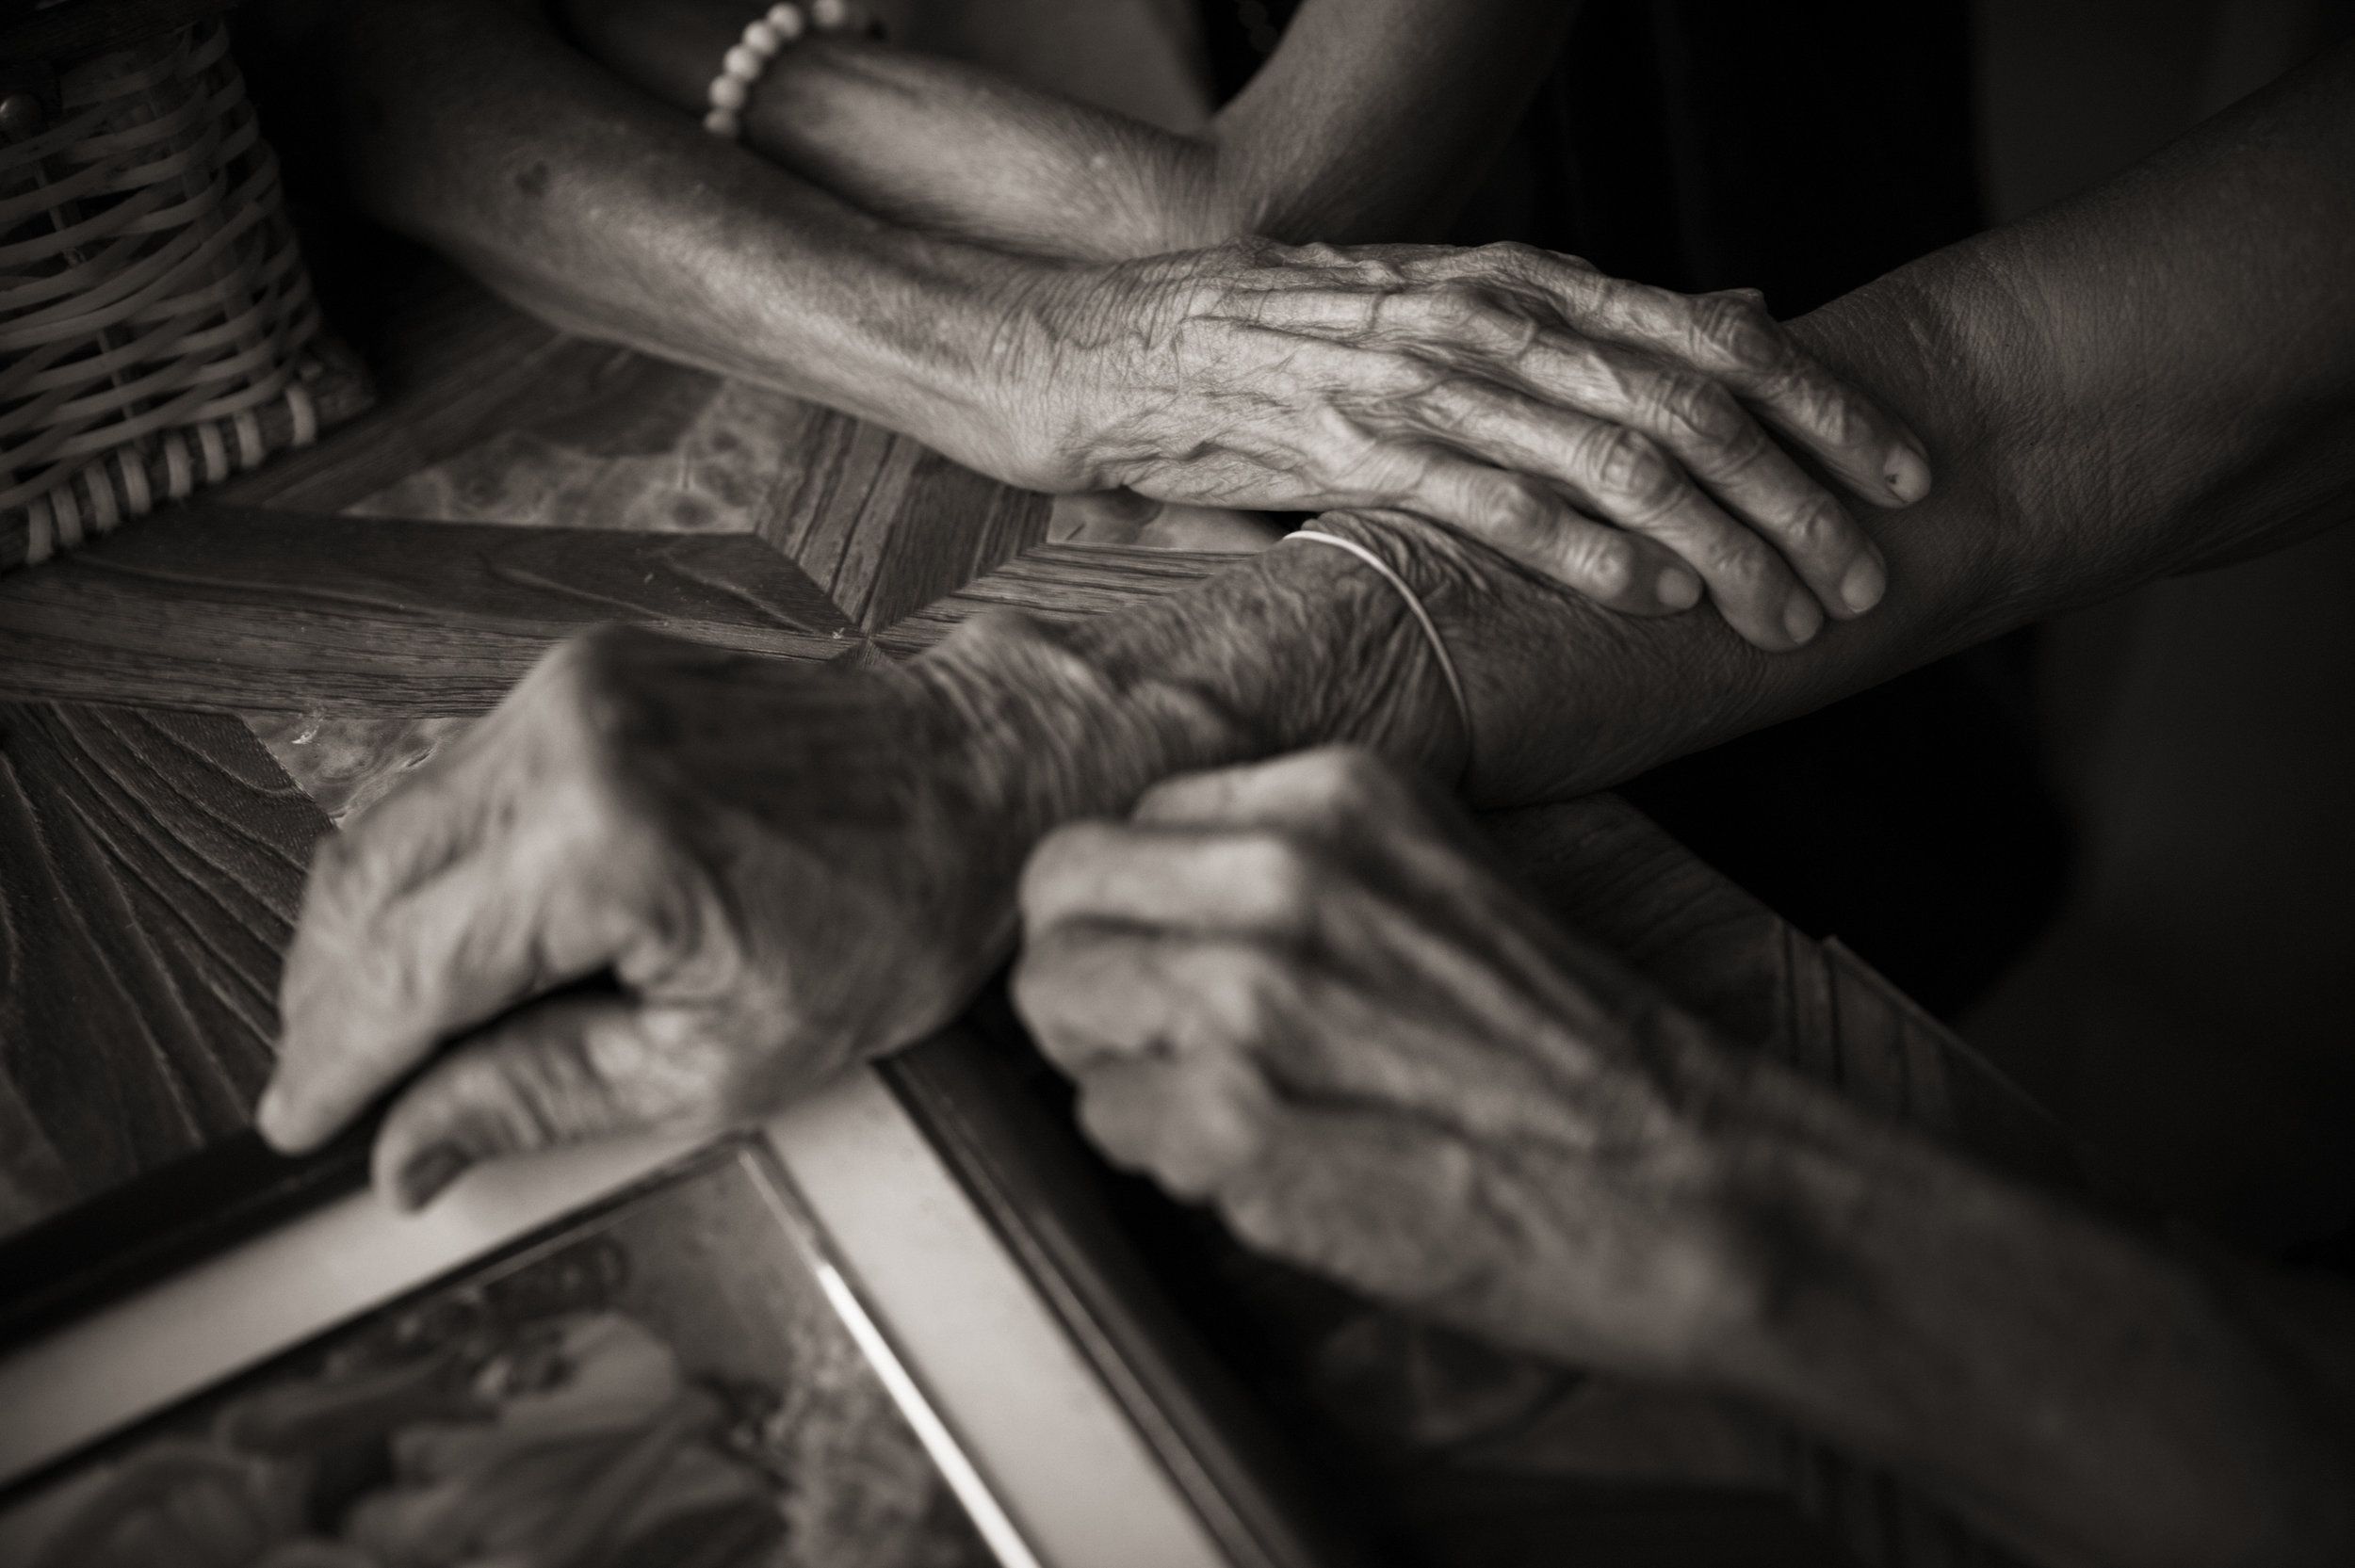 Isabelita Vinuya, Belen Alarcon Culala and Maria Lalu Quilantang clasp hands. The three women were repeatedly raped as children by Japanese imperial soldiers in their village of Mapaniqui. Image by Cheryl Diaz Meyer. Philippines, 2019.